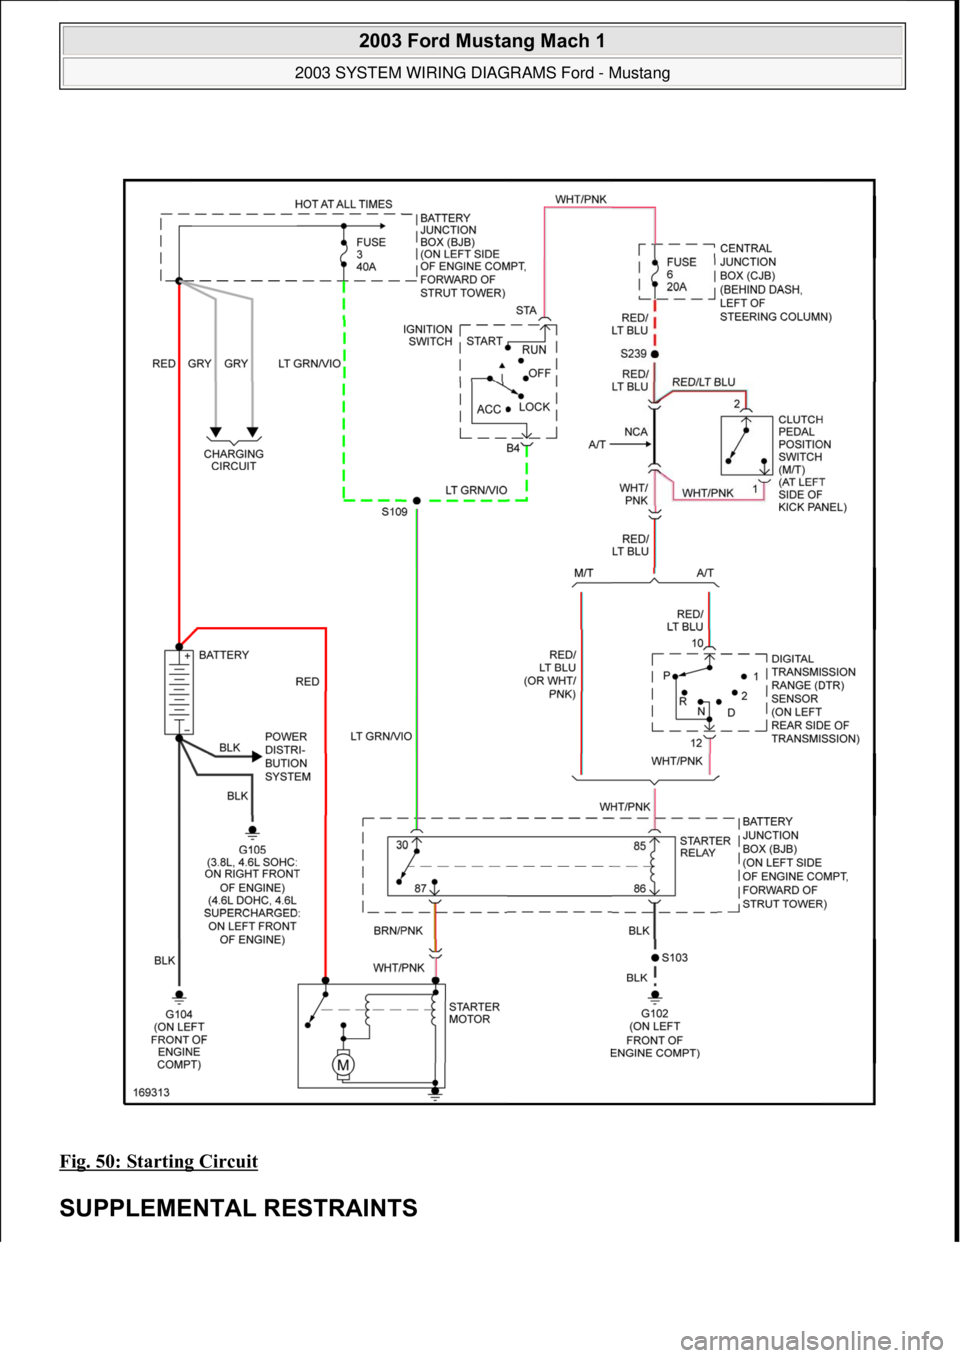 FORD MUSTANG 2003  Workshop Manual Fig. 50: Starting Circuit 
SUPPLEMENTAL RESTRAINTS
 
2003 Ford Mustang Mach 1 
2003 SYSTEM WIRING DIAGRAMS Ford - Mustang  
111  
18 ноября  2011 г. 12:54:33Page 51 © 2006 Mitchell Repair Info